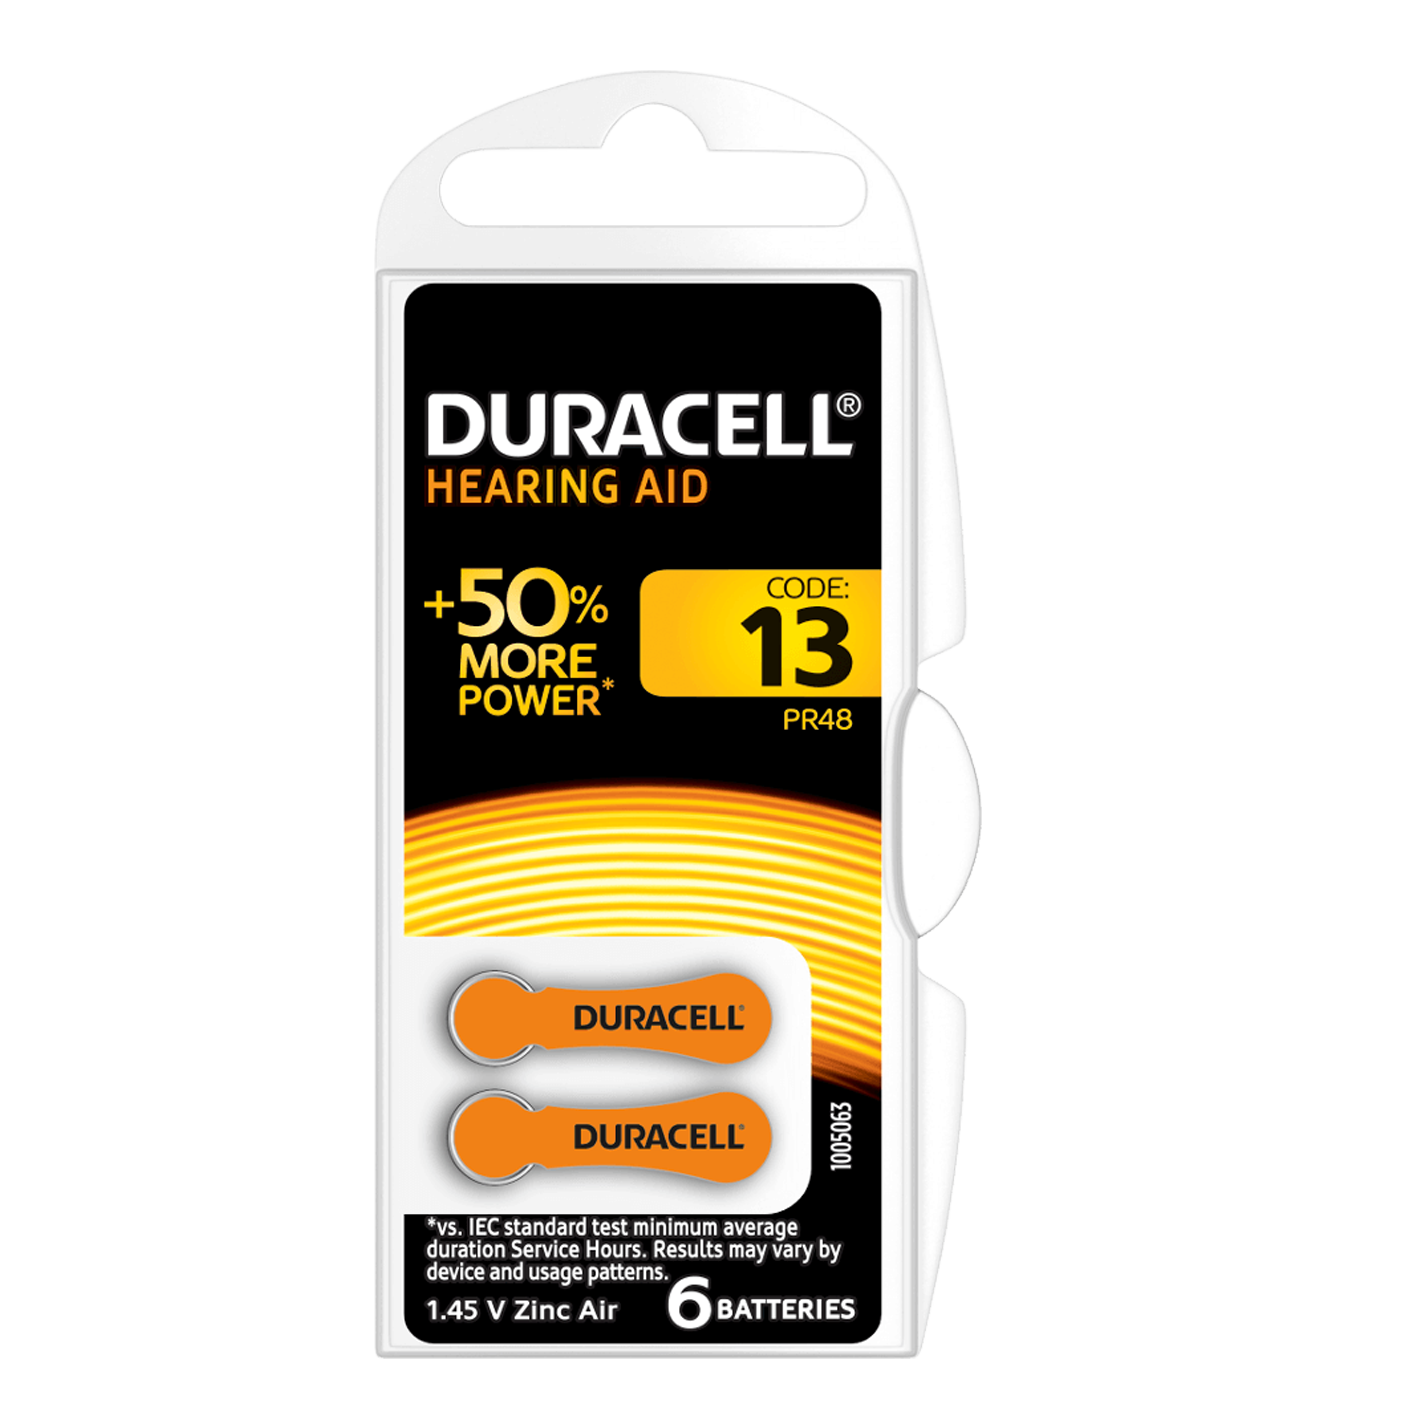 Duracell 13 Hearing Aid Batteries, Pack of 6